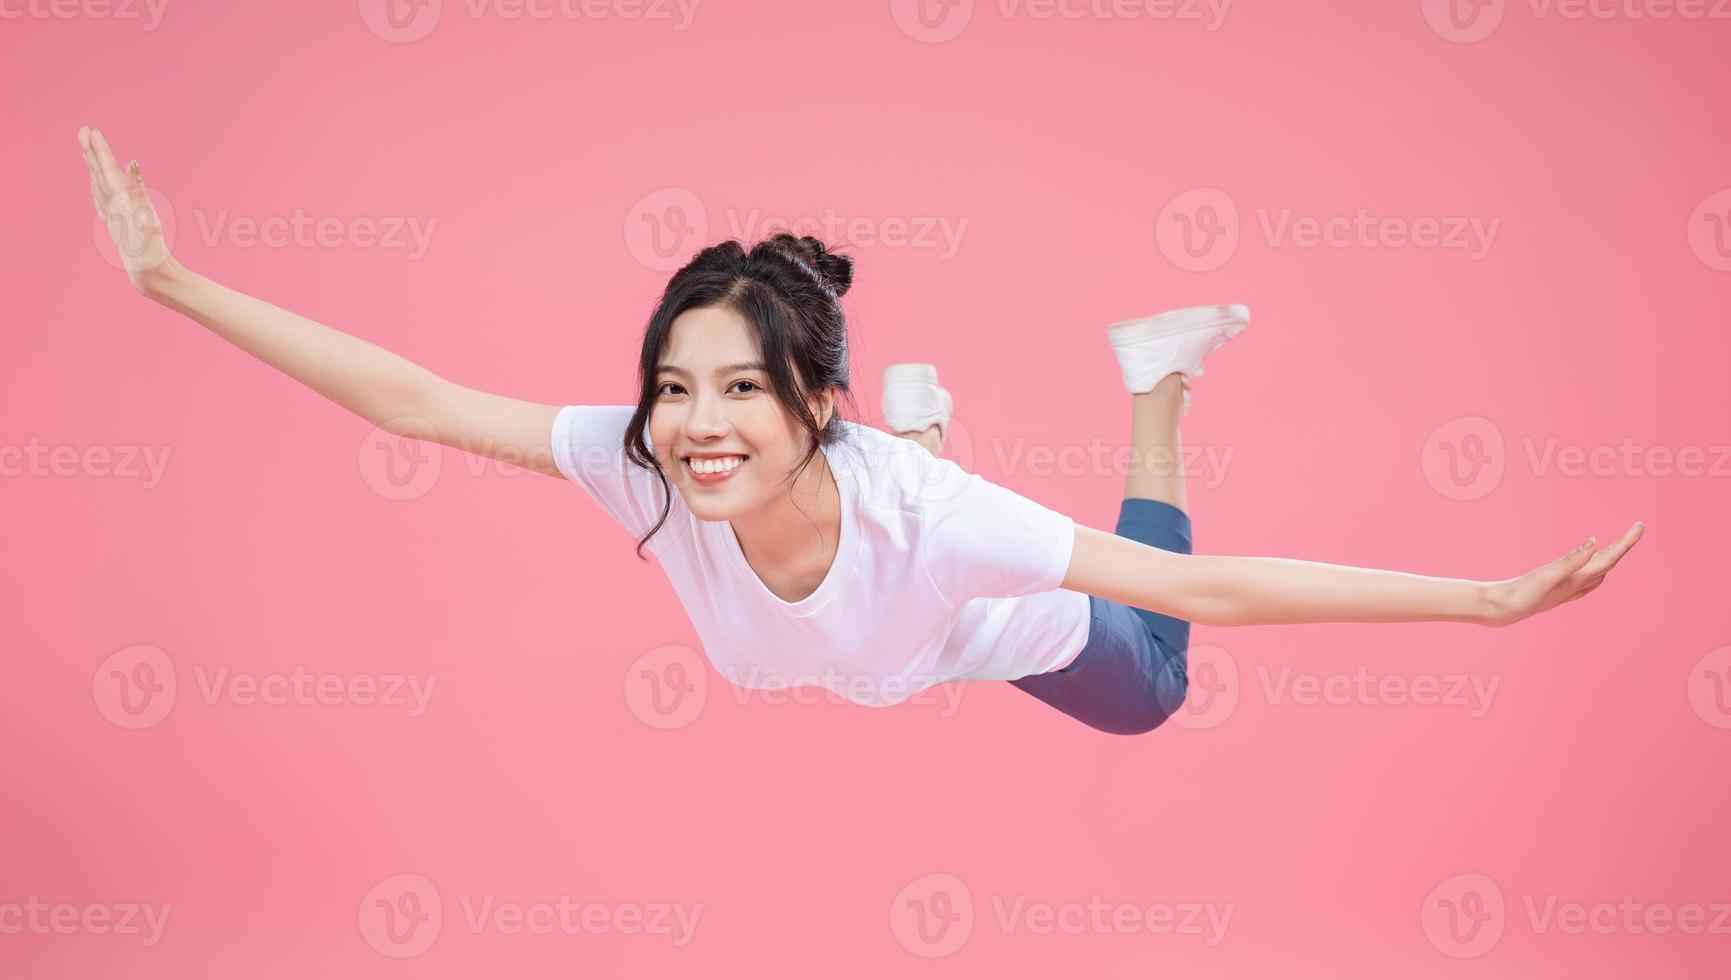 Young Asian woman on background photo